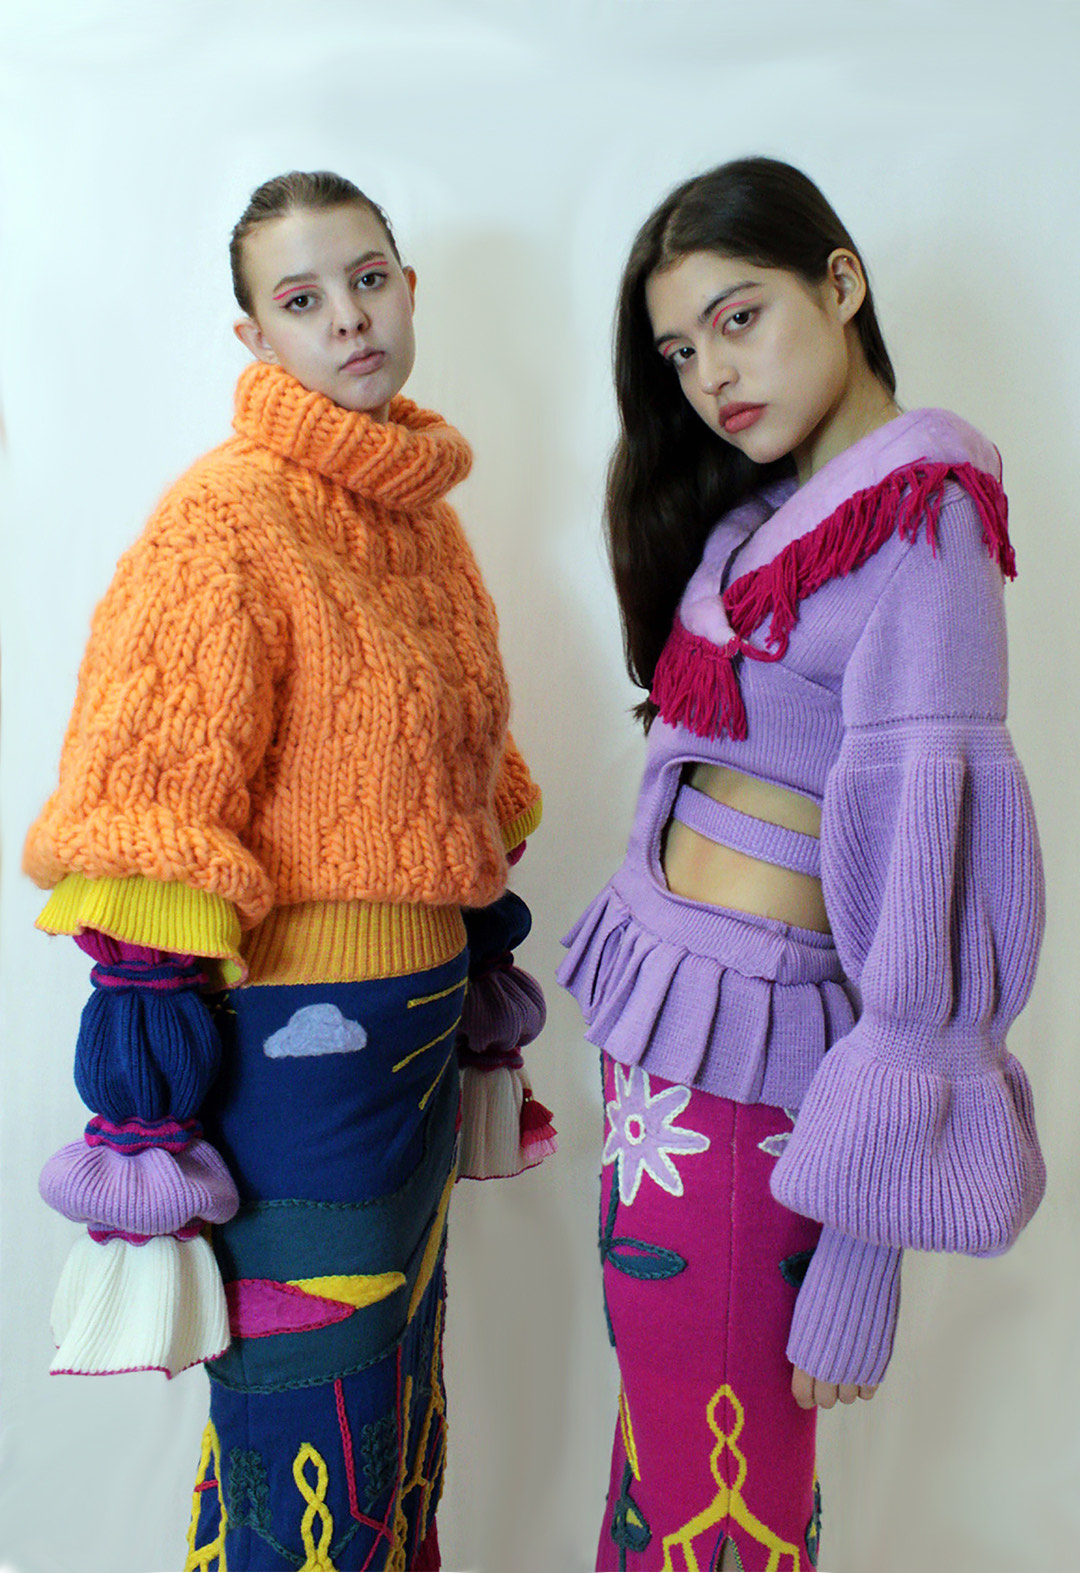 Two models standing in front of a white background. The model with long hair is wearing a lavender-colored knit wrap top with shaped sleeves and crochet fringe at the shawl collar. She also is wearing a skirt with a floral jacquard multicolor pattern. The model with a pony tail is wearing an orange knit sweater with multicolor sleeve. 